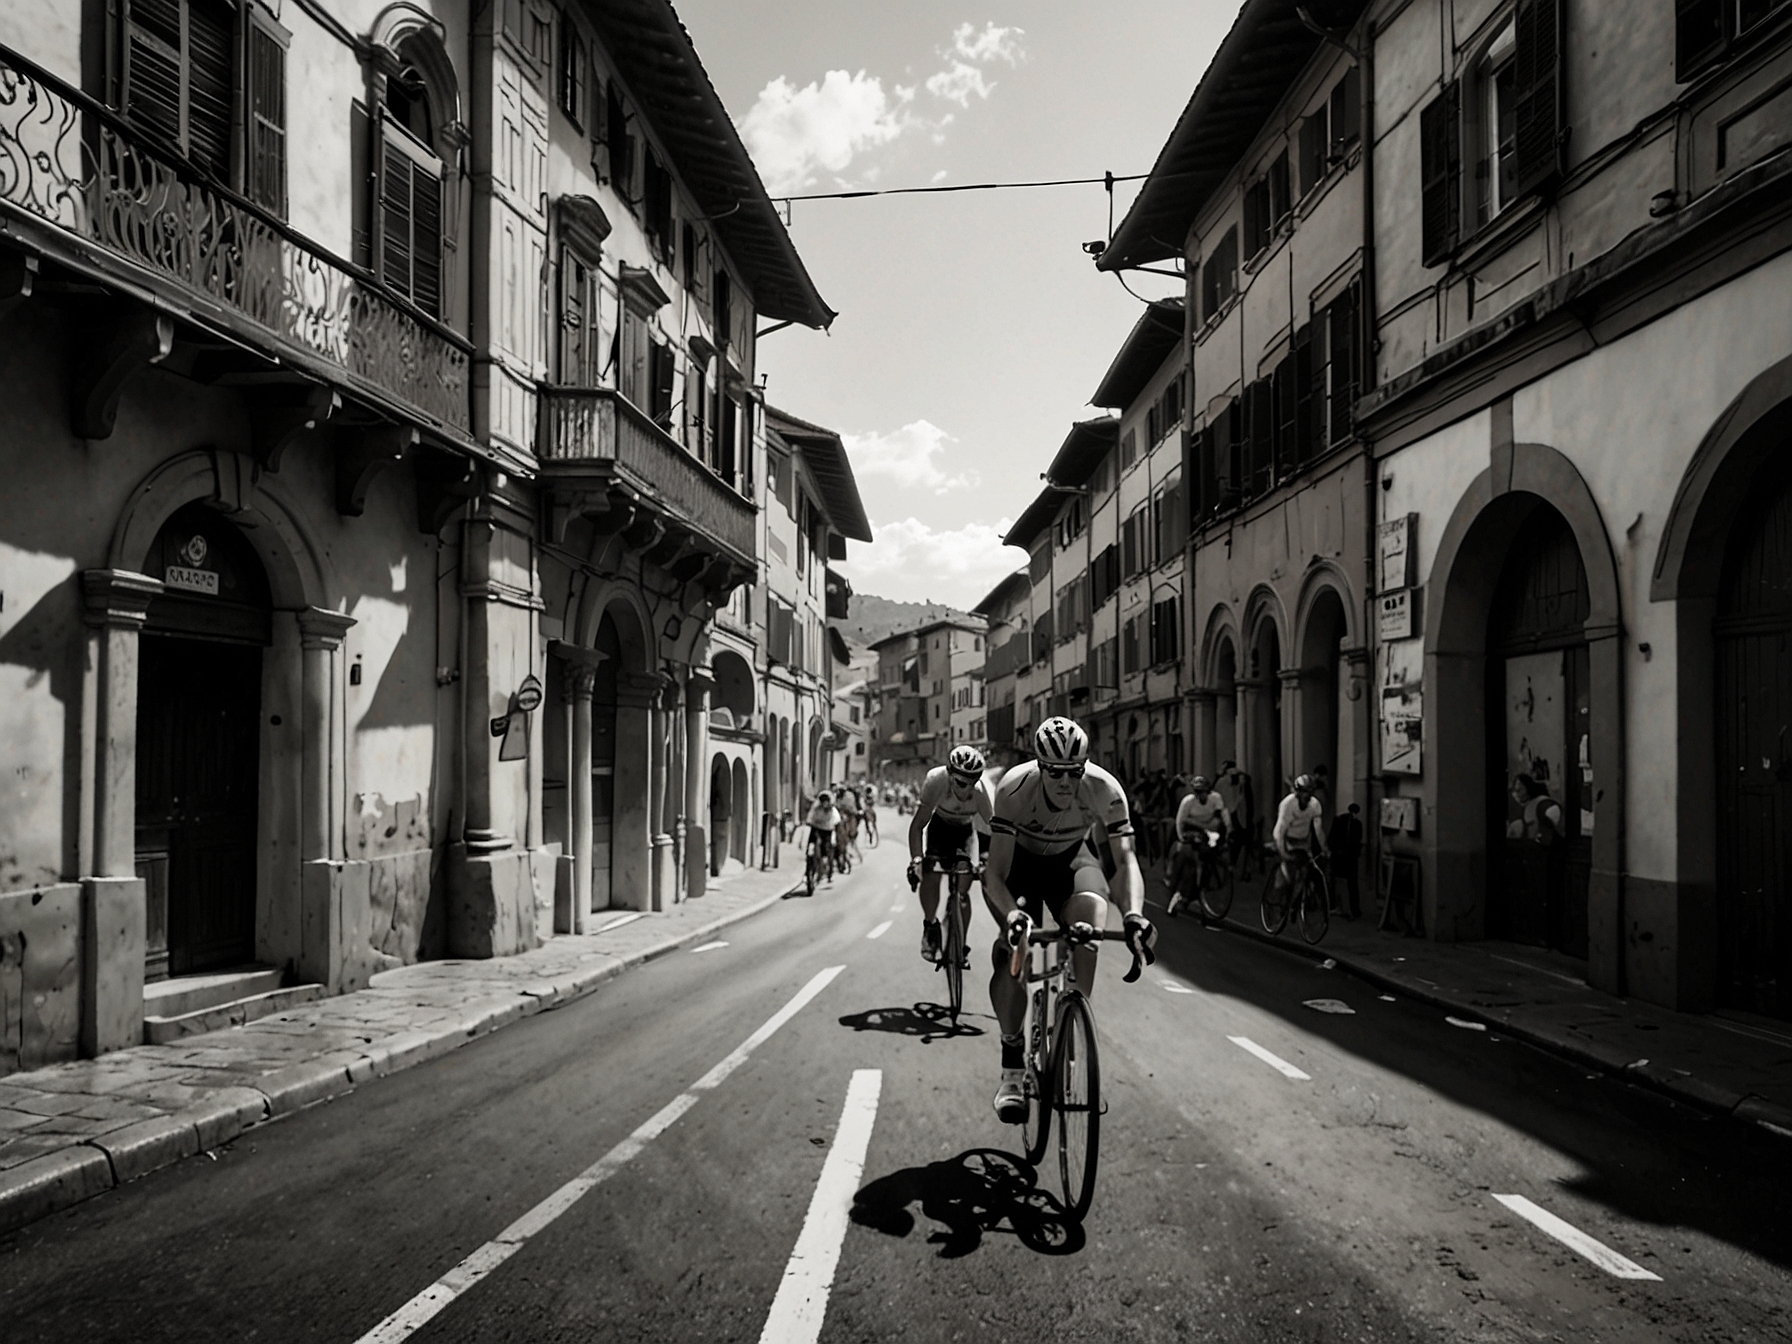 Cyclists ride through the historic streets of Florence, Italy, as they embark on the 2024 Tour de France. The beautiful scenery and iconic landmarks mark a unique beginning for the race.